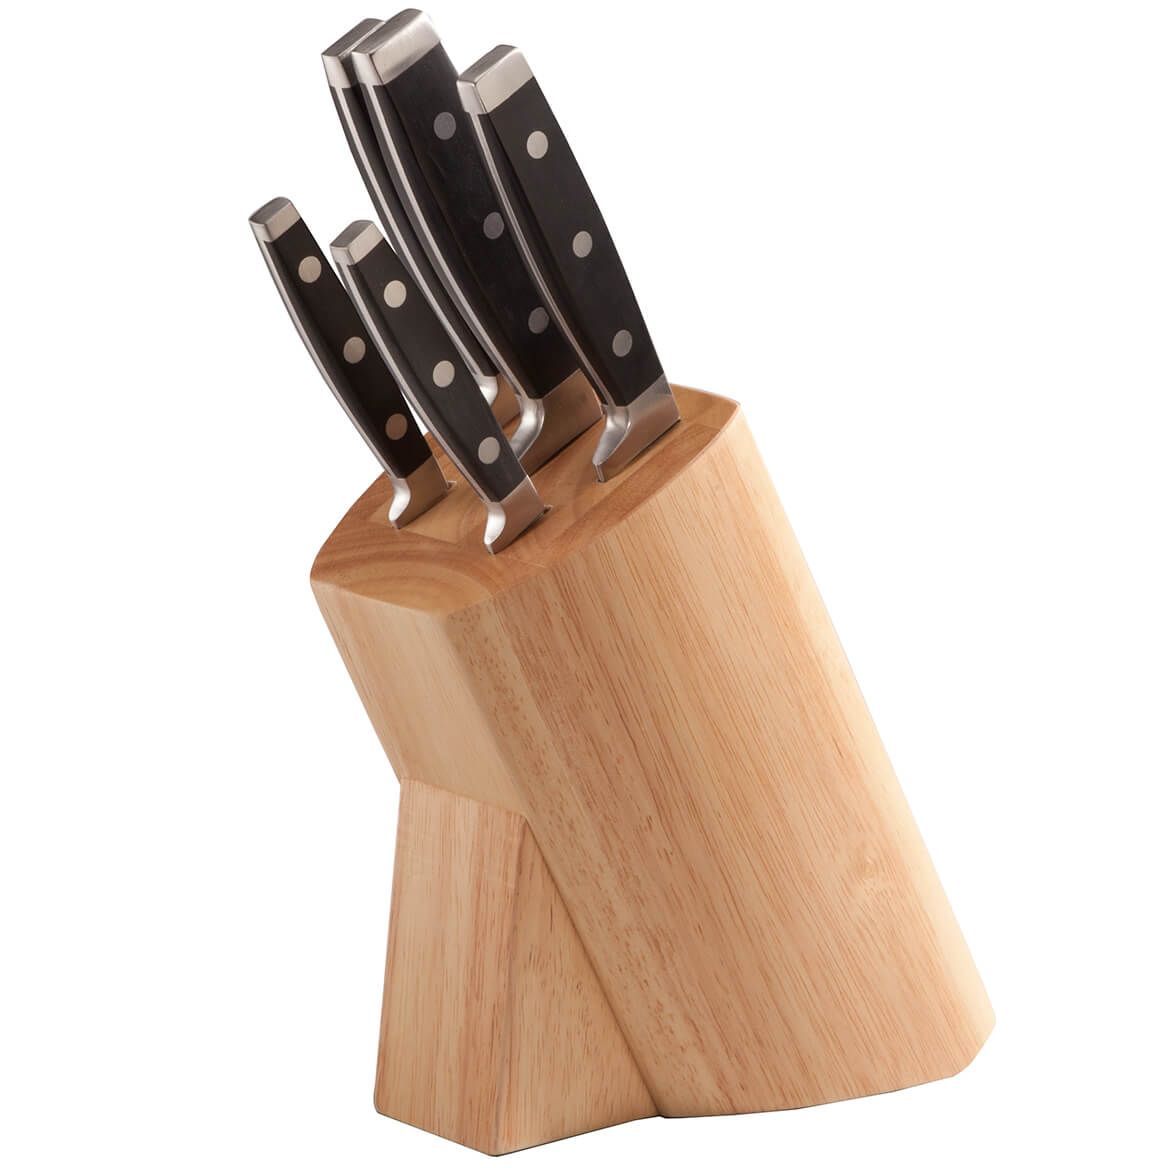 6PC Forged Knife Block Set by Home Marketplace + '-' + 362758